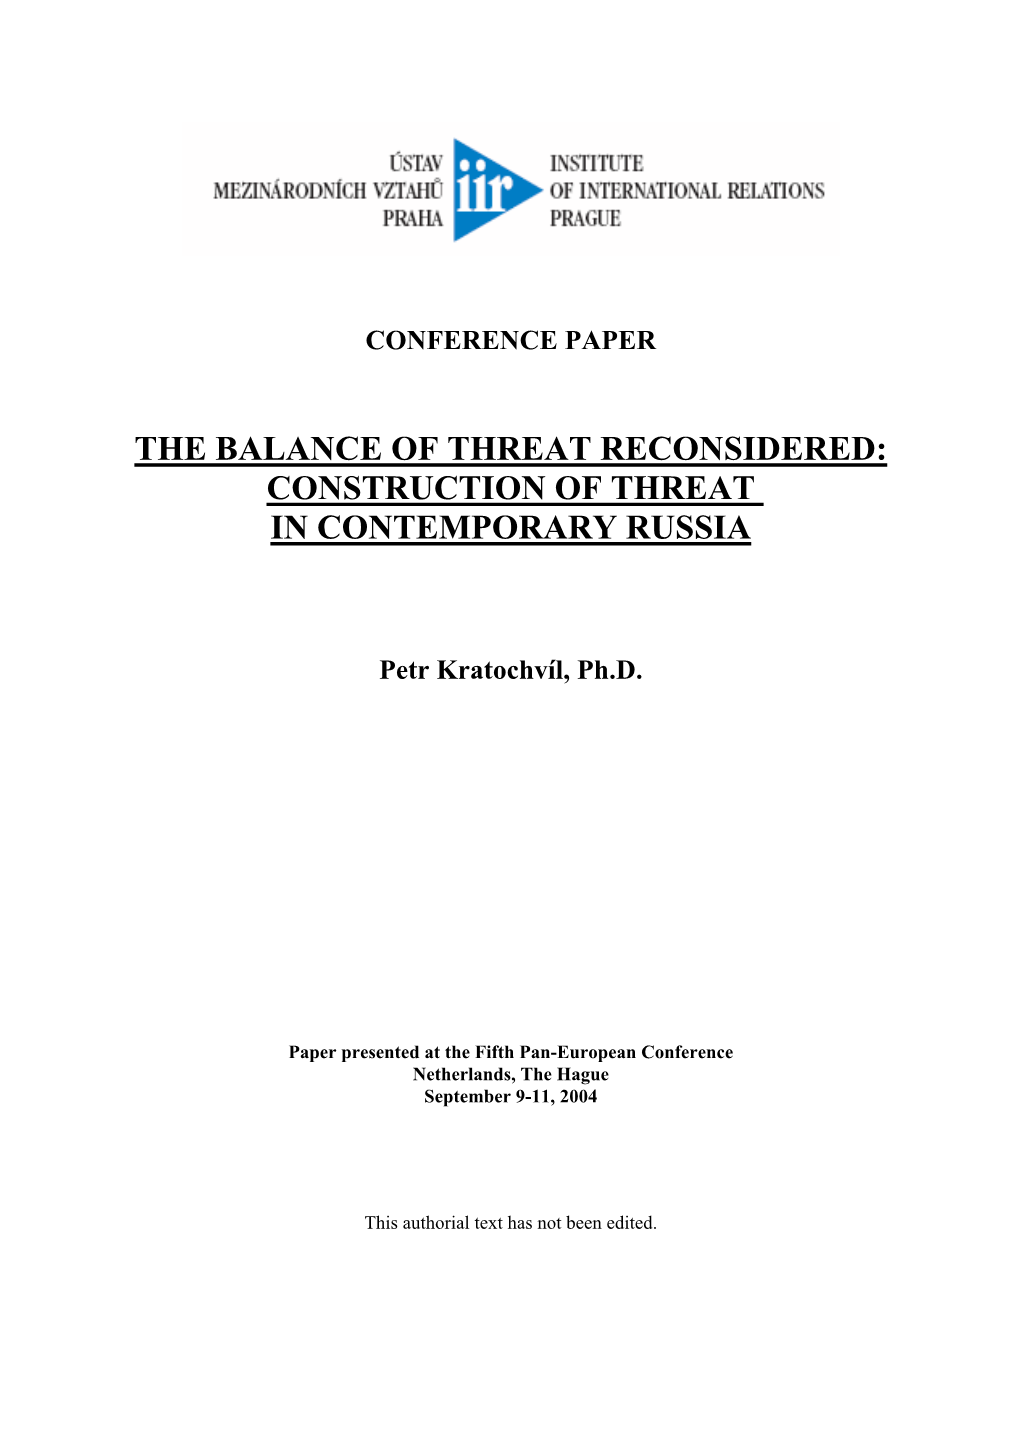 The Balance of Threat Reconsidered: Construction of Threat in Contemporary Russia